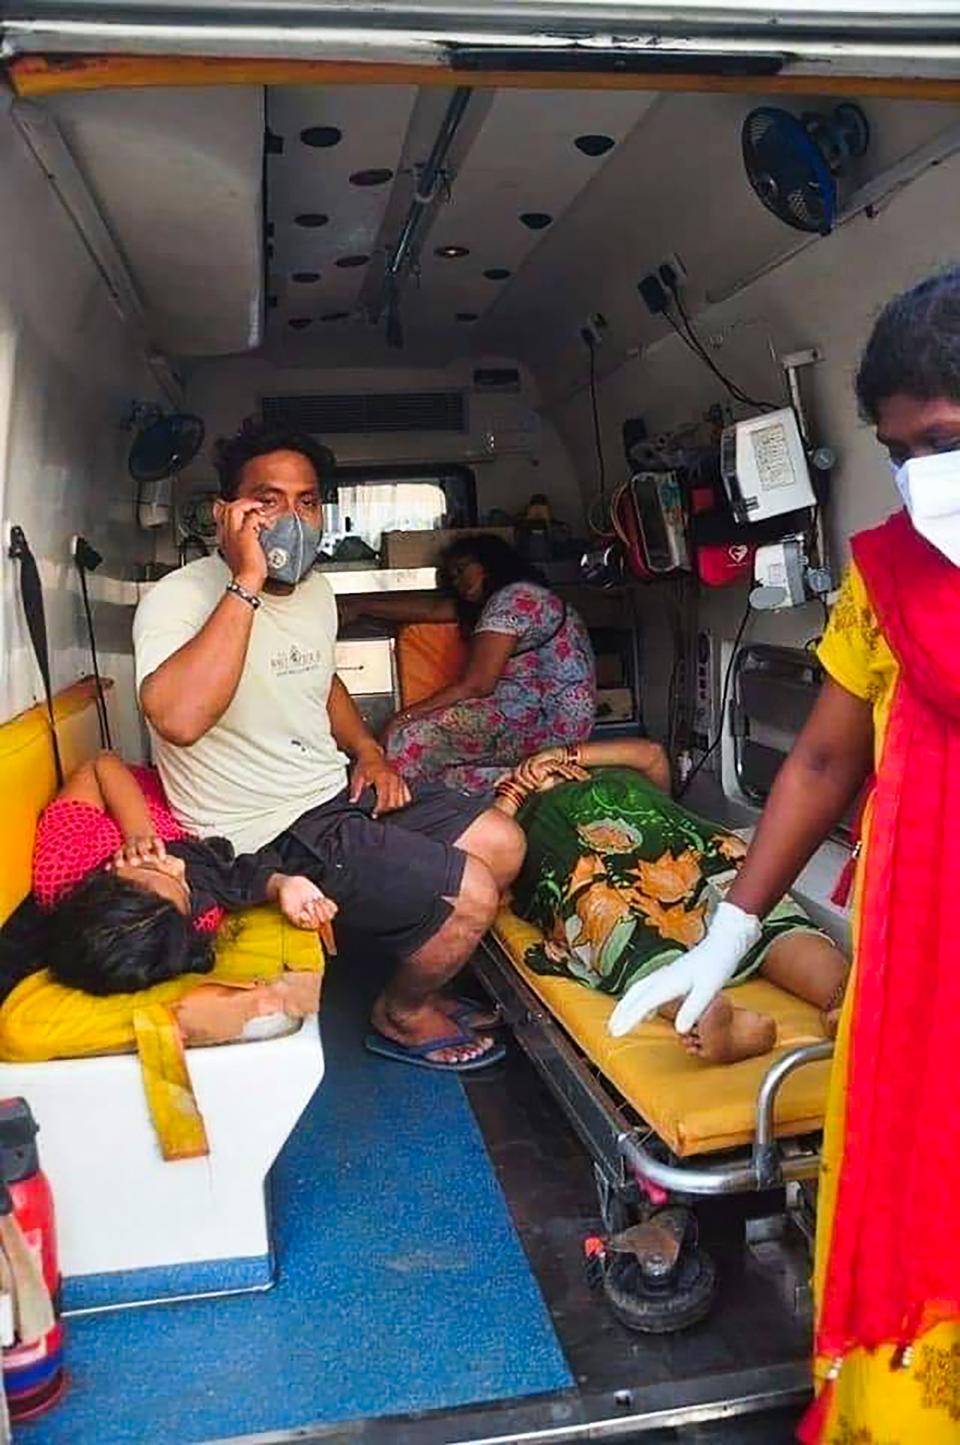 Women are evacuated to a hospital in an ambulance following a gas leak incident from an LG Polymers plant in Visakhapatnam on May 7, 2020. - At least five people have been killed and 1,000 hospitalised after a gas leak at a chemicals plant on the east coast of India, authorities said on May 7, warning the death toll would climb. The gas leaked out of two 5,000-tonne tanks that had been unattended due to India's coronavirus lockdown in place since late March, according to a local police officer. (Photo by - / AFP) (Photo by -/AFP via Getty Images)